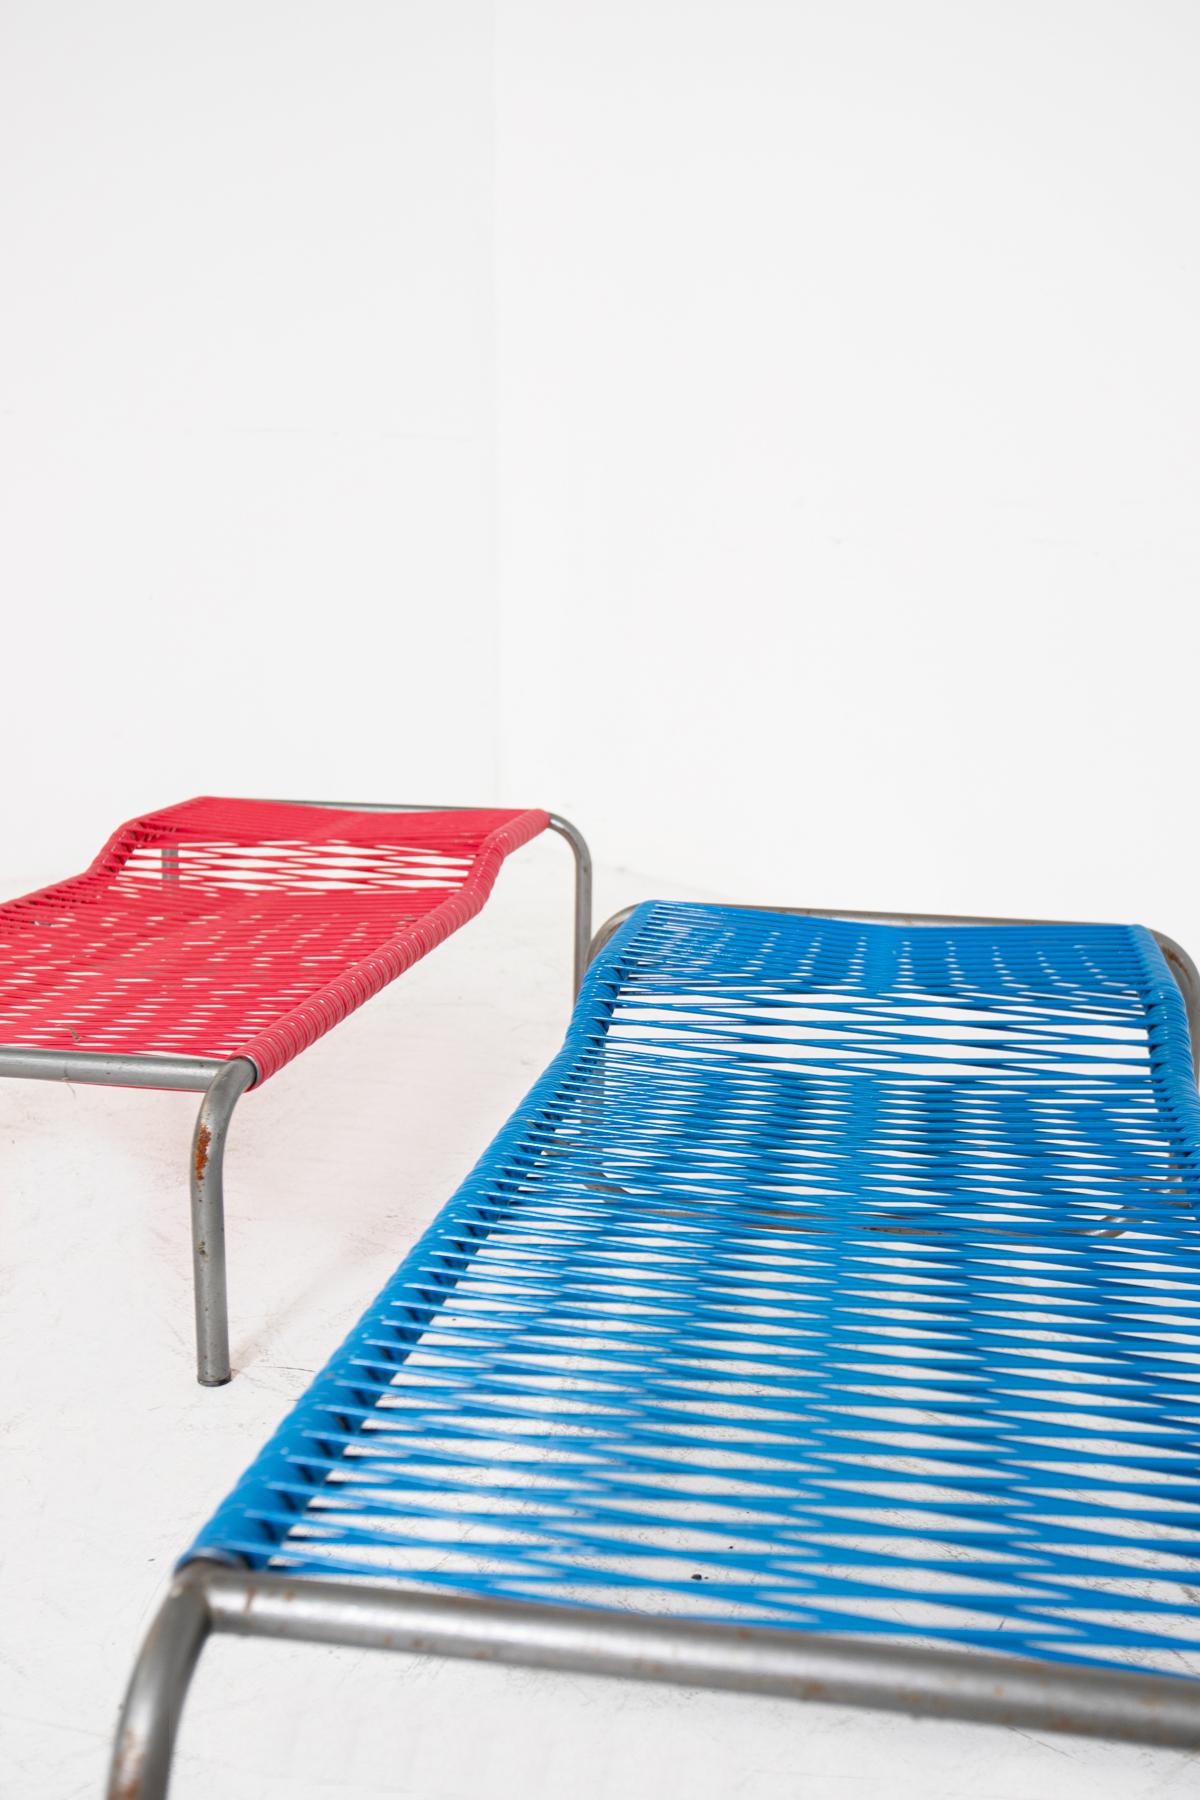 Pair of Italian Iron and Plastic Deckchairs Red and Blue 1